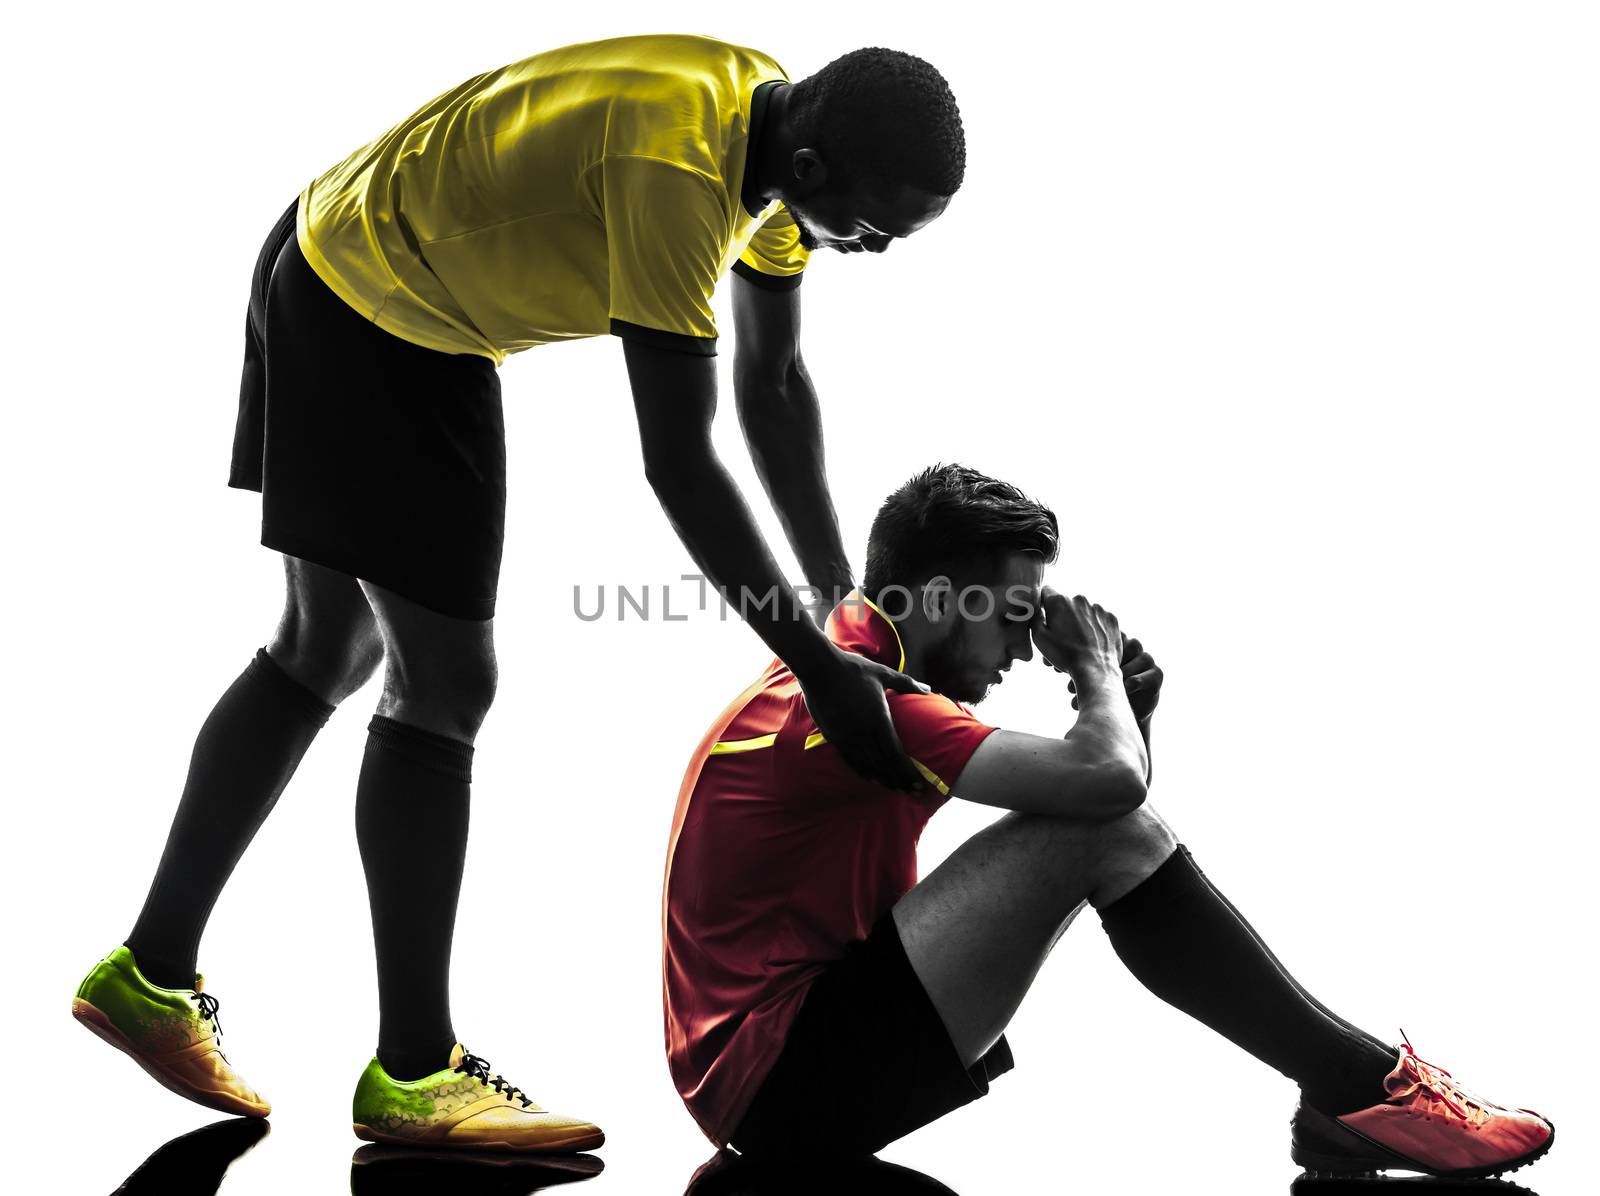 two men soccer player playing football competition fair play concept in silhouette on white background